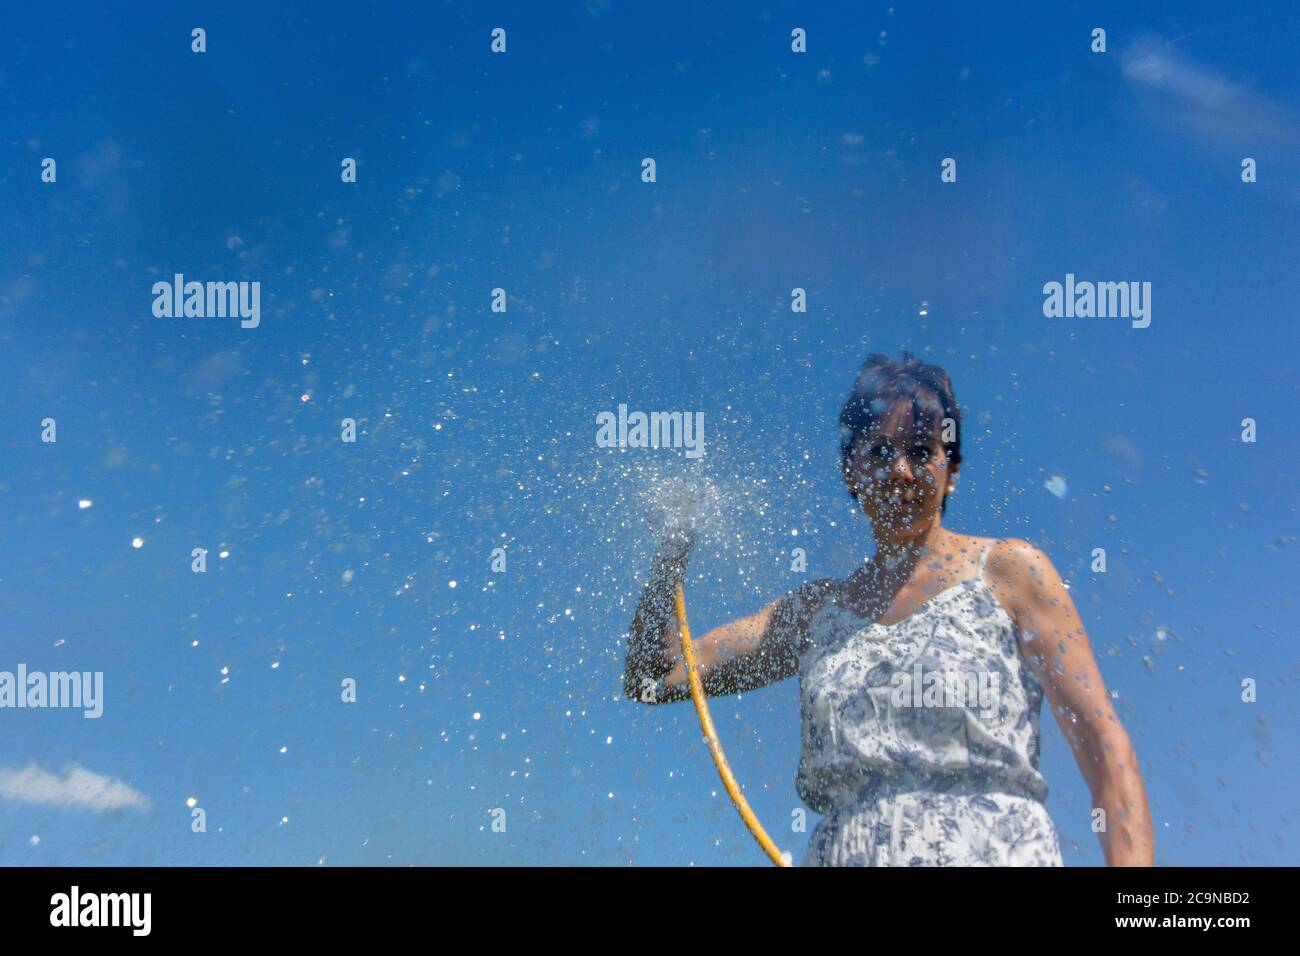 Woman spraying water from a hosepipe. North Yorkshire, UK. Stock Photo